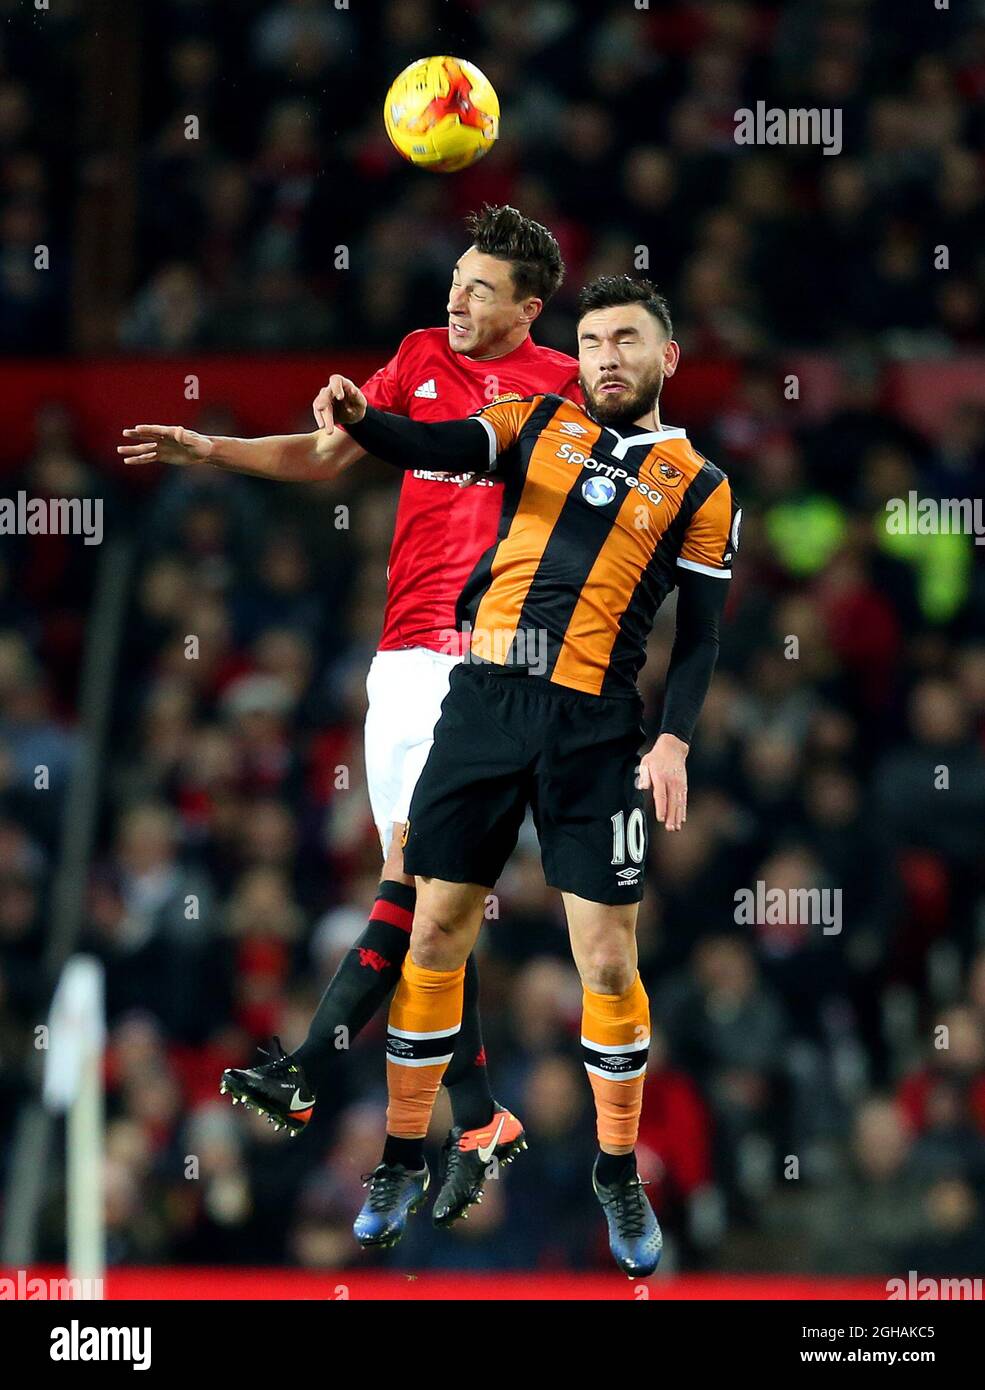 Robert Snodgrass of Hull City challenges Darmian of Manchester United during the EFL Cup semi final 1st Leg match at Old Trafford Stadium, Manchester. Picture date: January 10th, 2017. Pic credit should read: Matt McNulty/Sportimage via PA Images Stock Photo